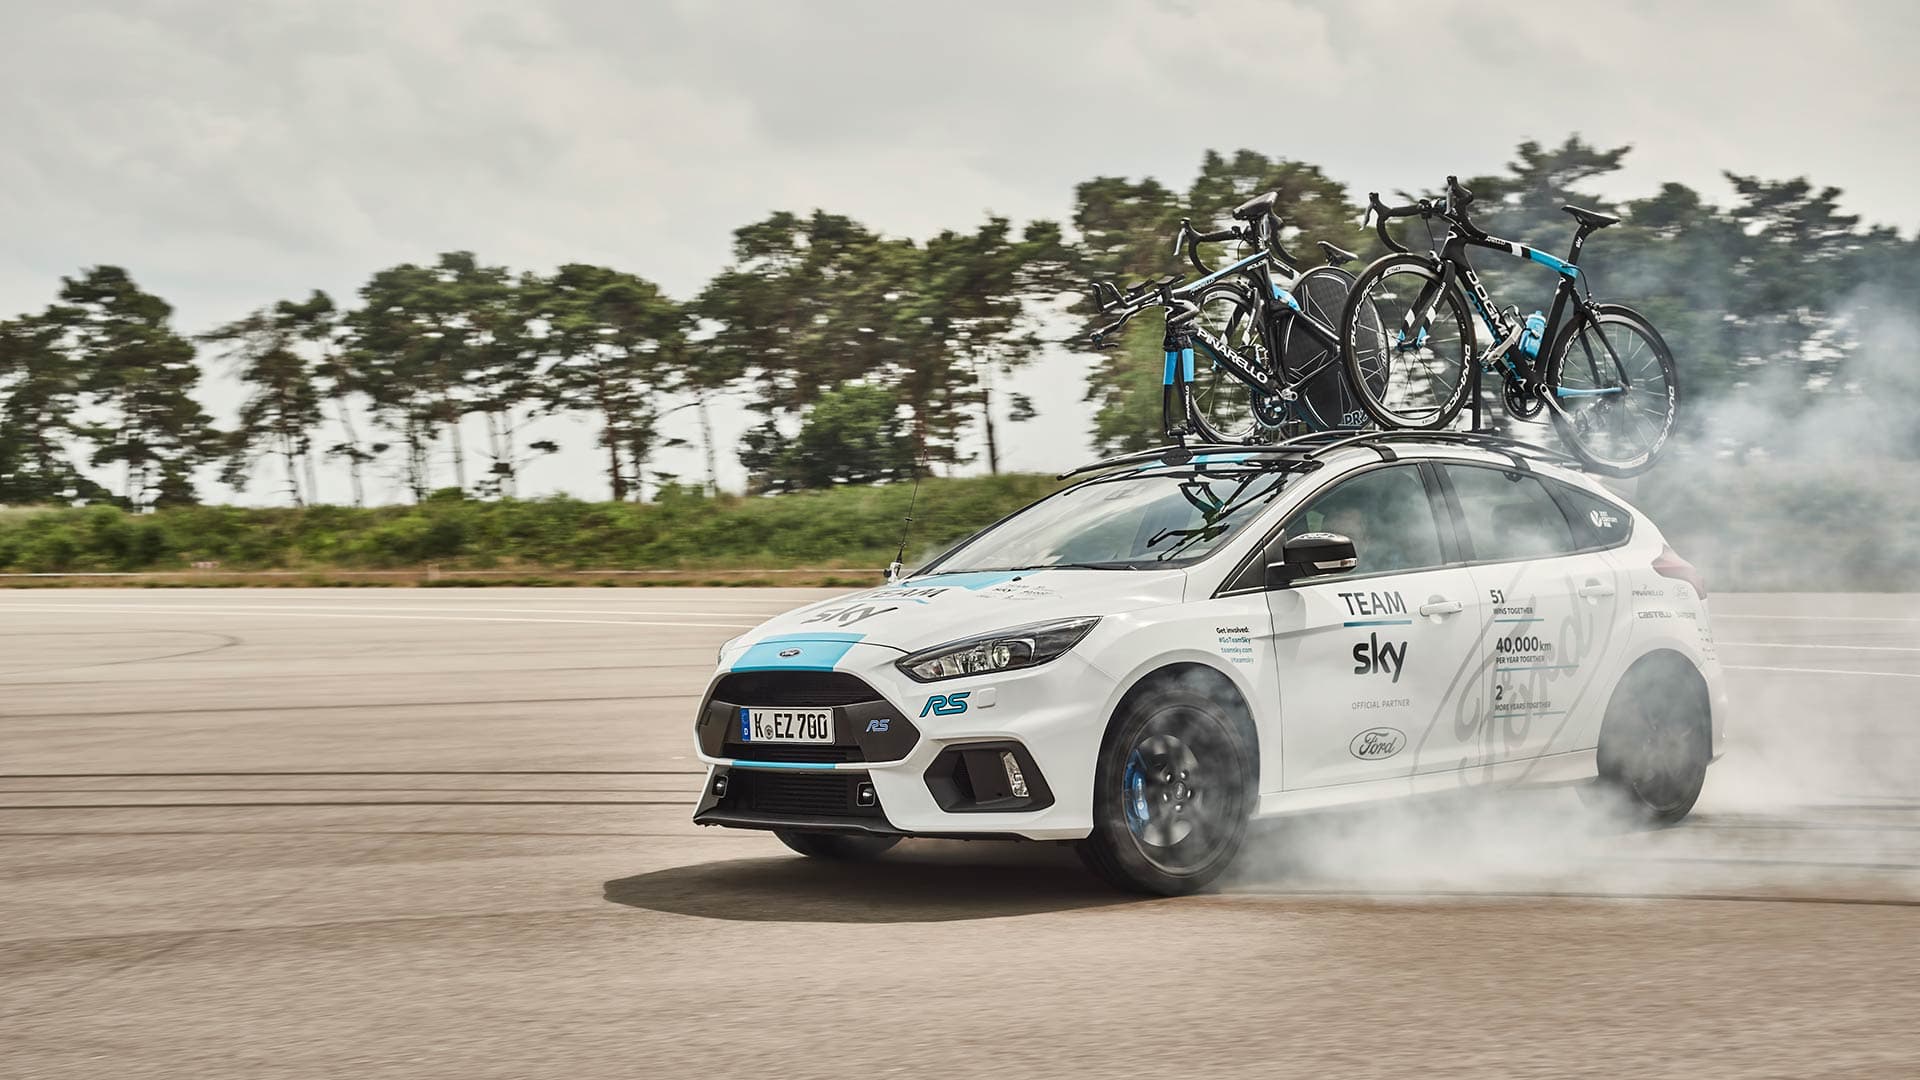 Ford Focus RS Put to Work as Chase Vehicle for the Tour de France